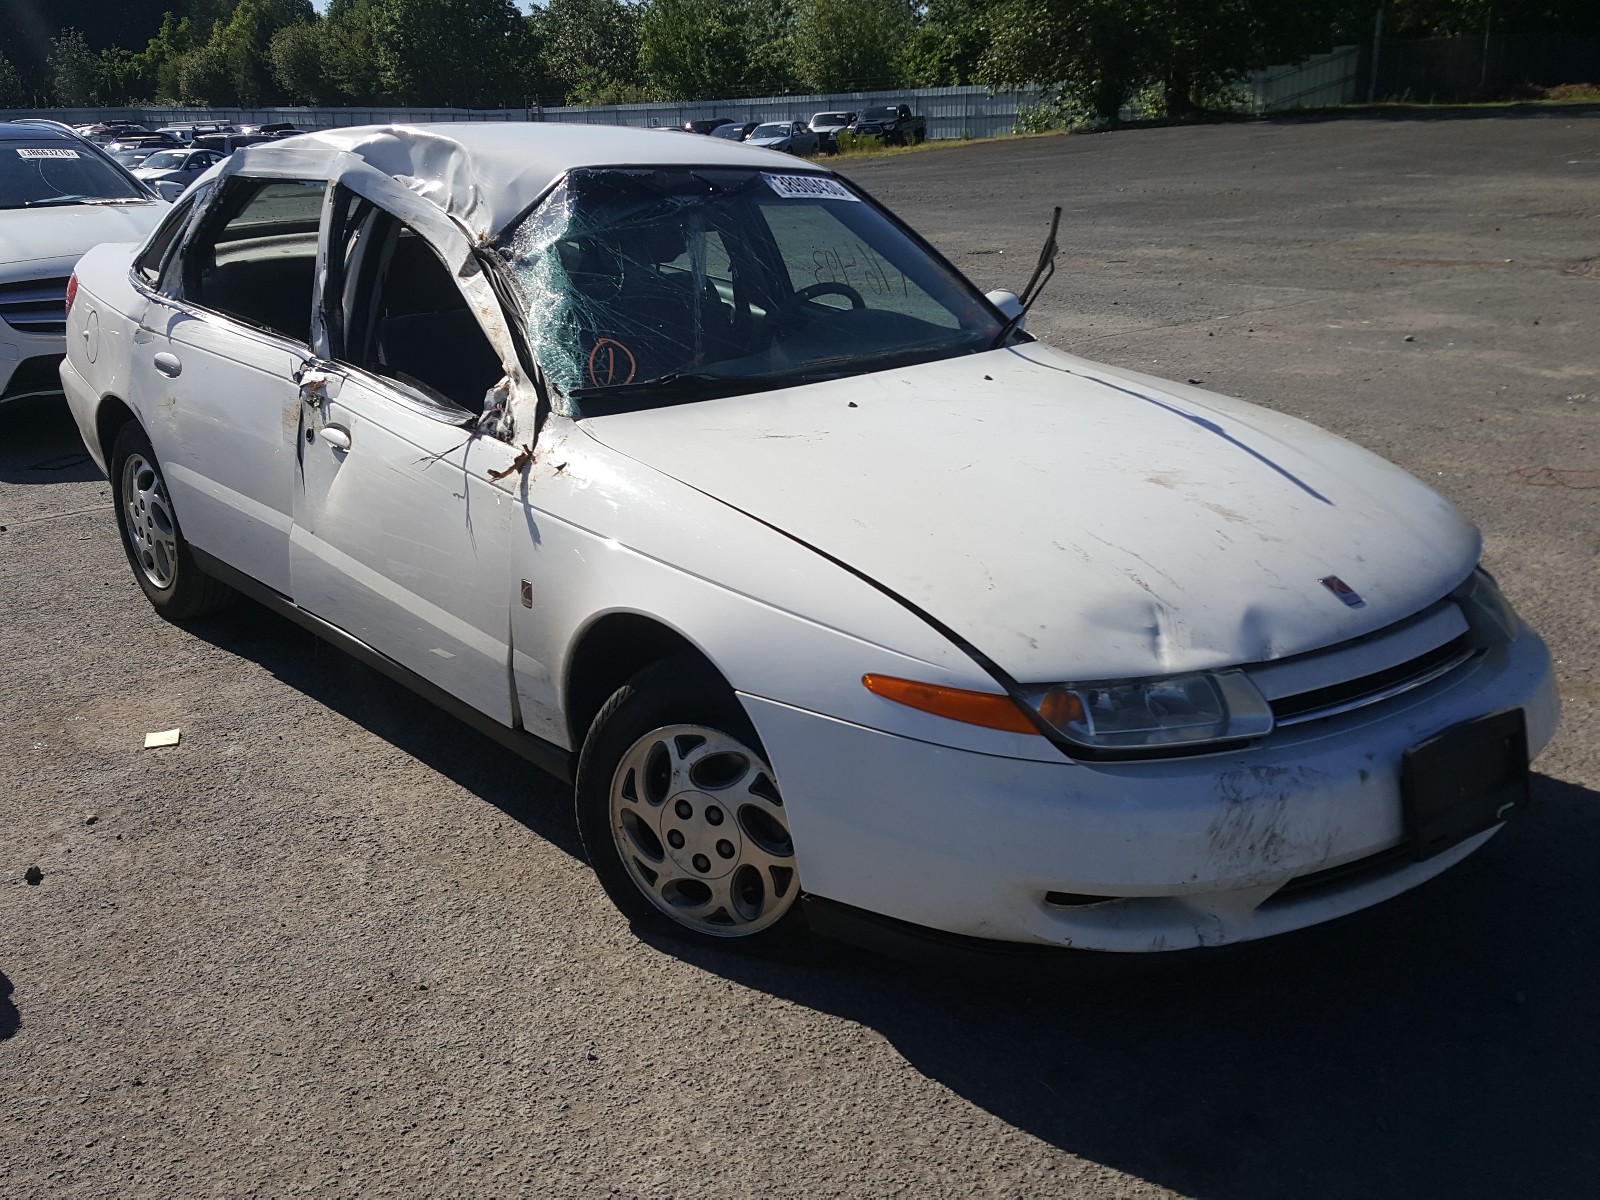 2002 saturn l200 for sale at copart portland or lot 38909430 salvagereseller com salvage reseller